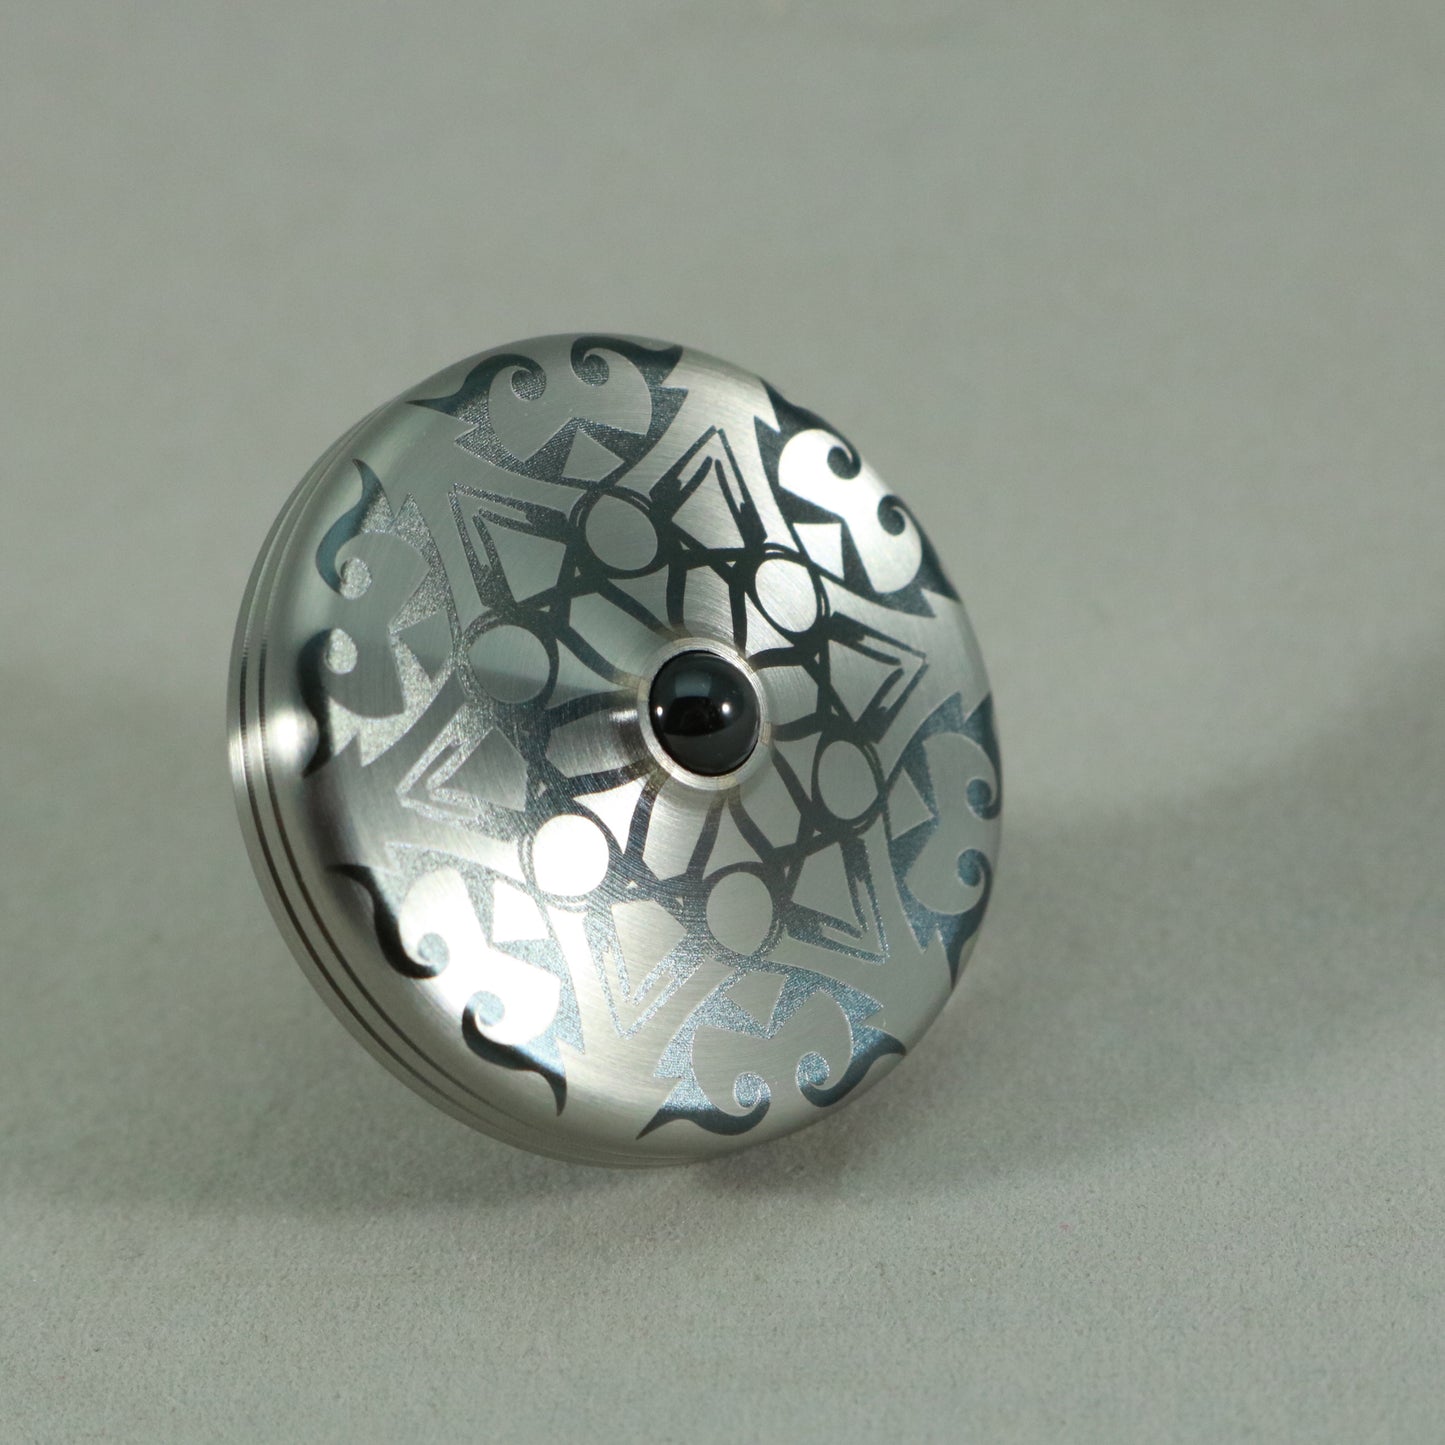 S2- Laser Etched Snowflake on a Stainless Steel Spinning Top v3